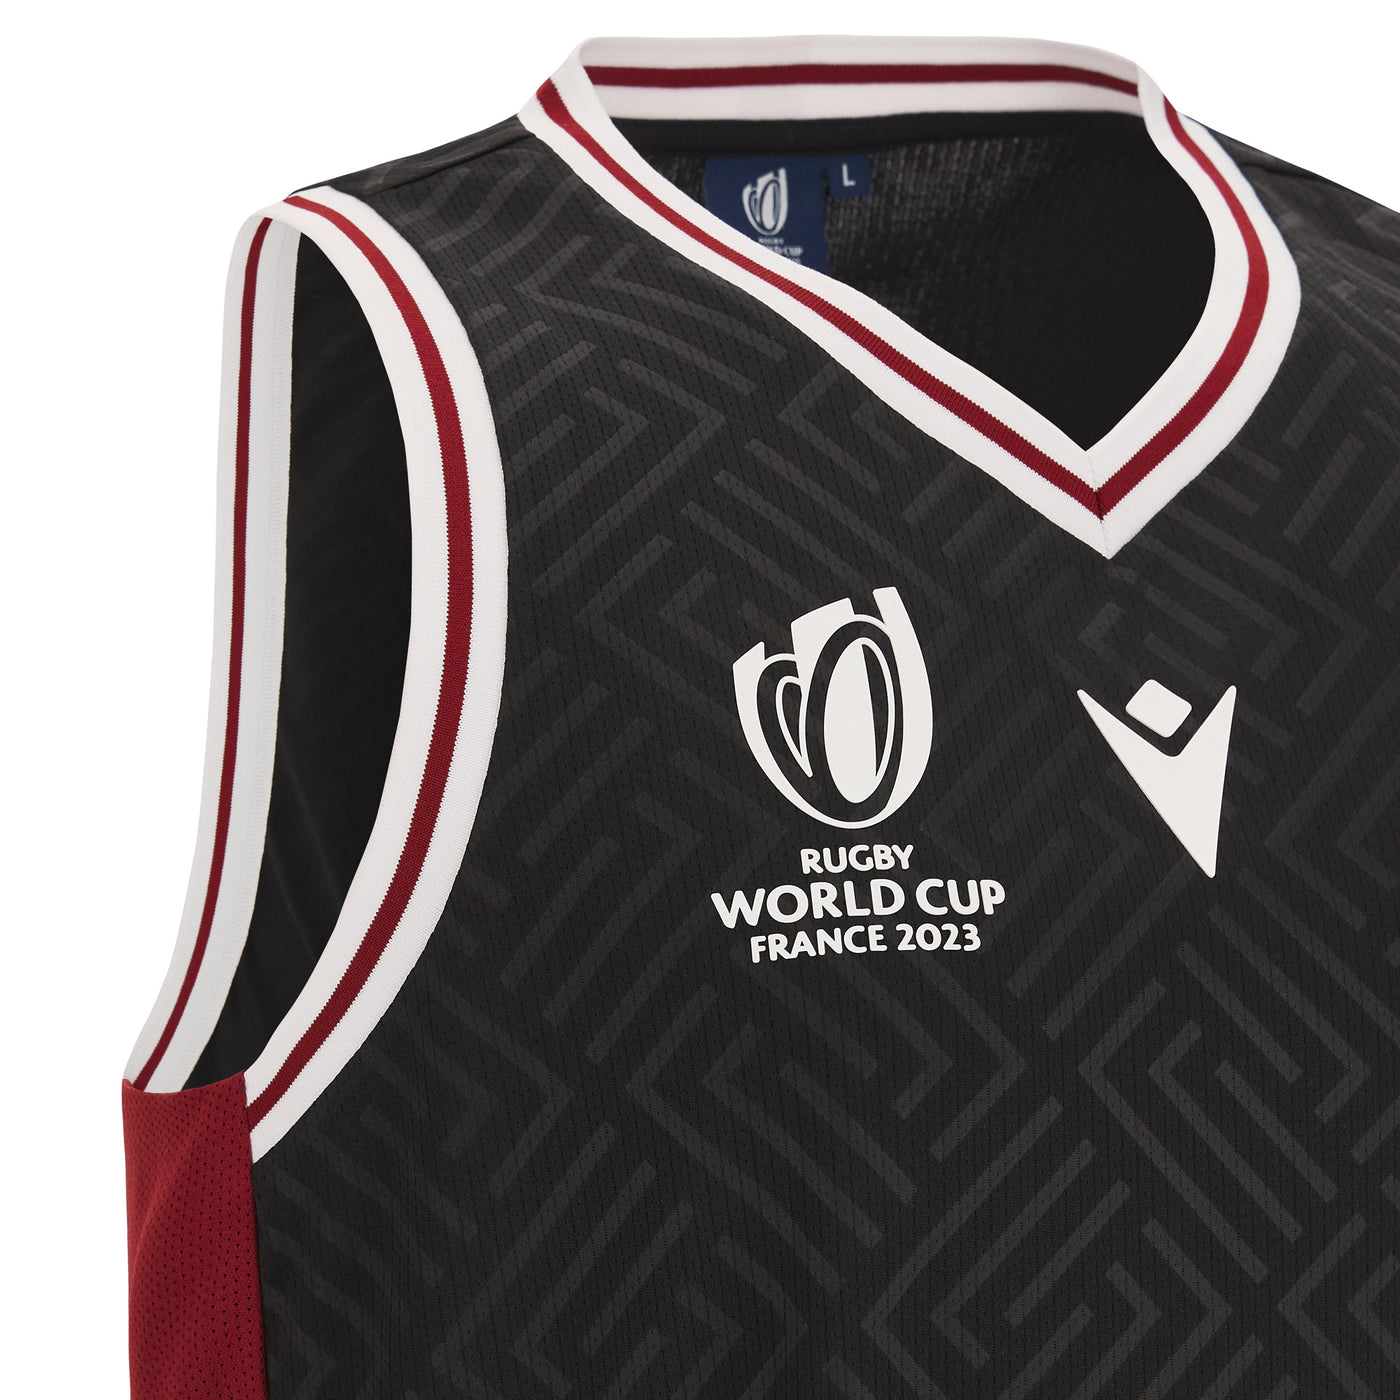 Wales Rugby World Cup 23 Men's Singlet